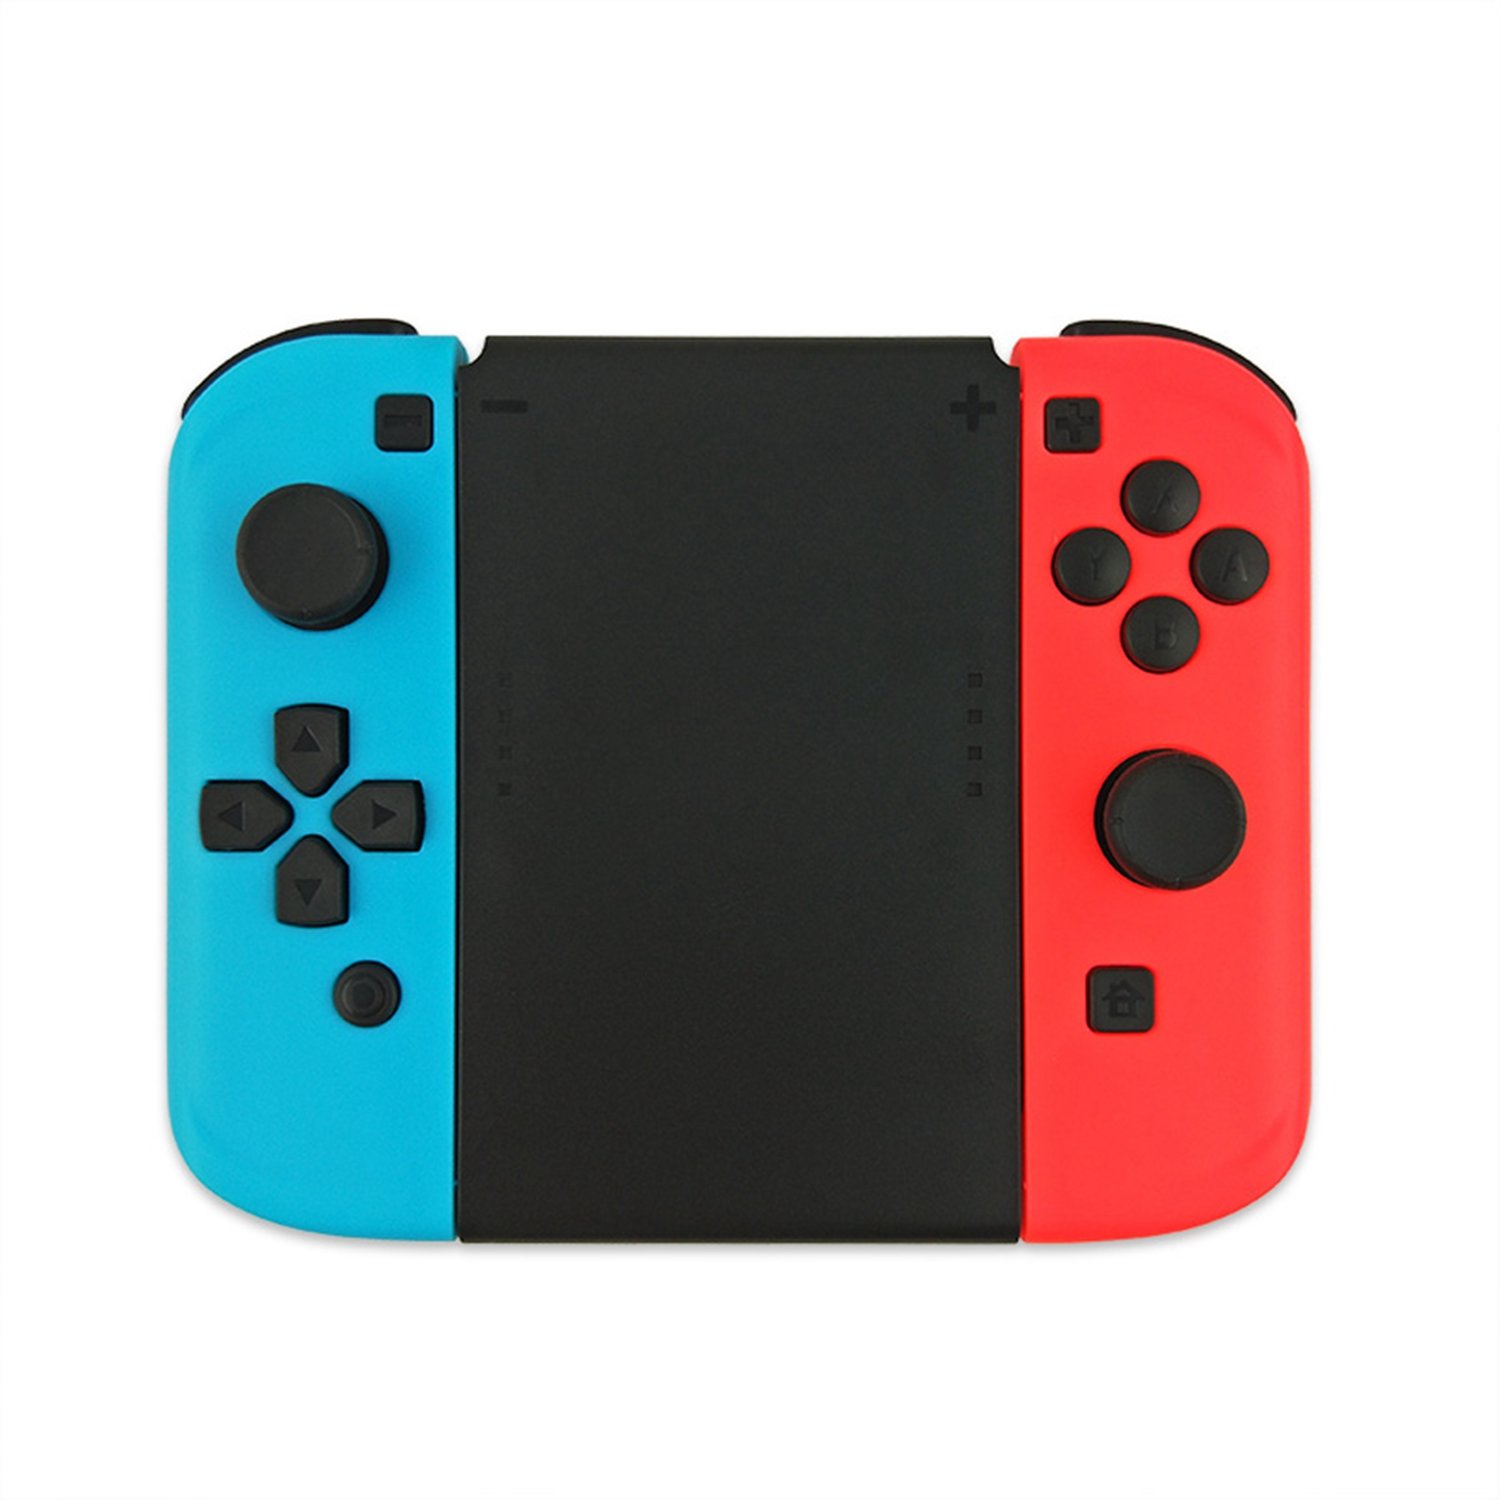 5 In 1 Connector Pack for Nintendo Switch Joy-Con Gamepad Game Controller Hand Grip Case Handle Holder Cover 2